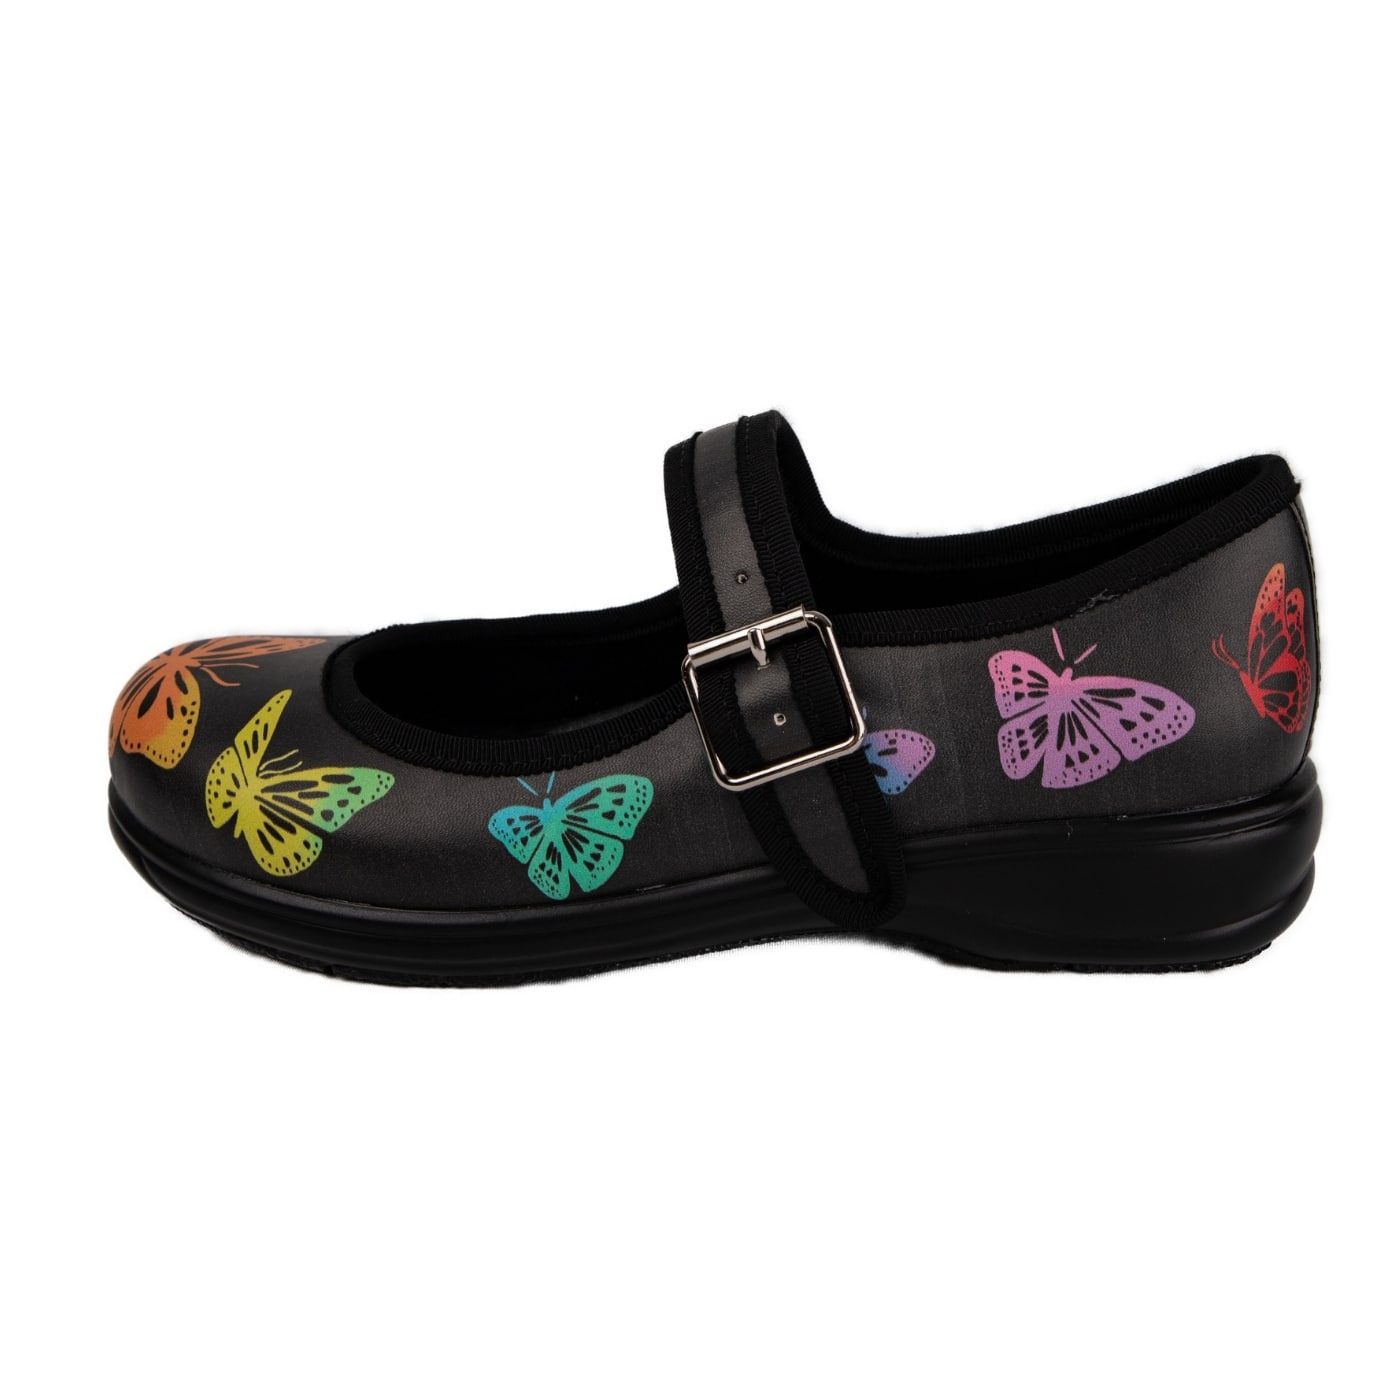 Kaleidoscope Mary Janes by RainbowsAndFairies.com.au (Monarch Butterfly - Mismtached Shoes - Dark Butterfly - Cute - Quirky) - SKU: FW_MARYJ_KSCOP_ORG - Pic-03